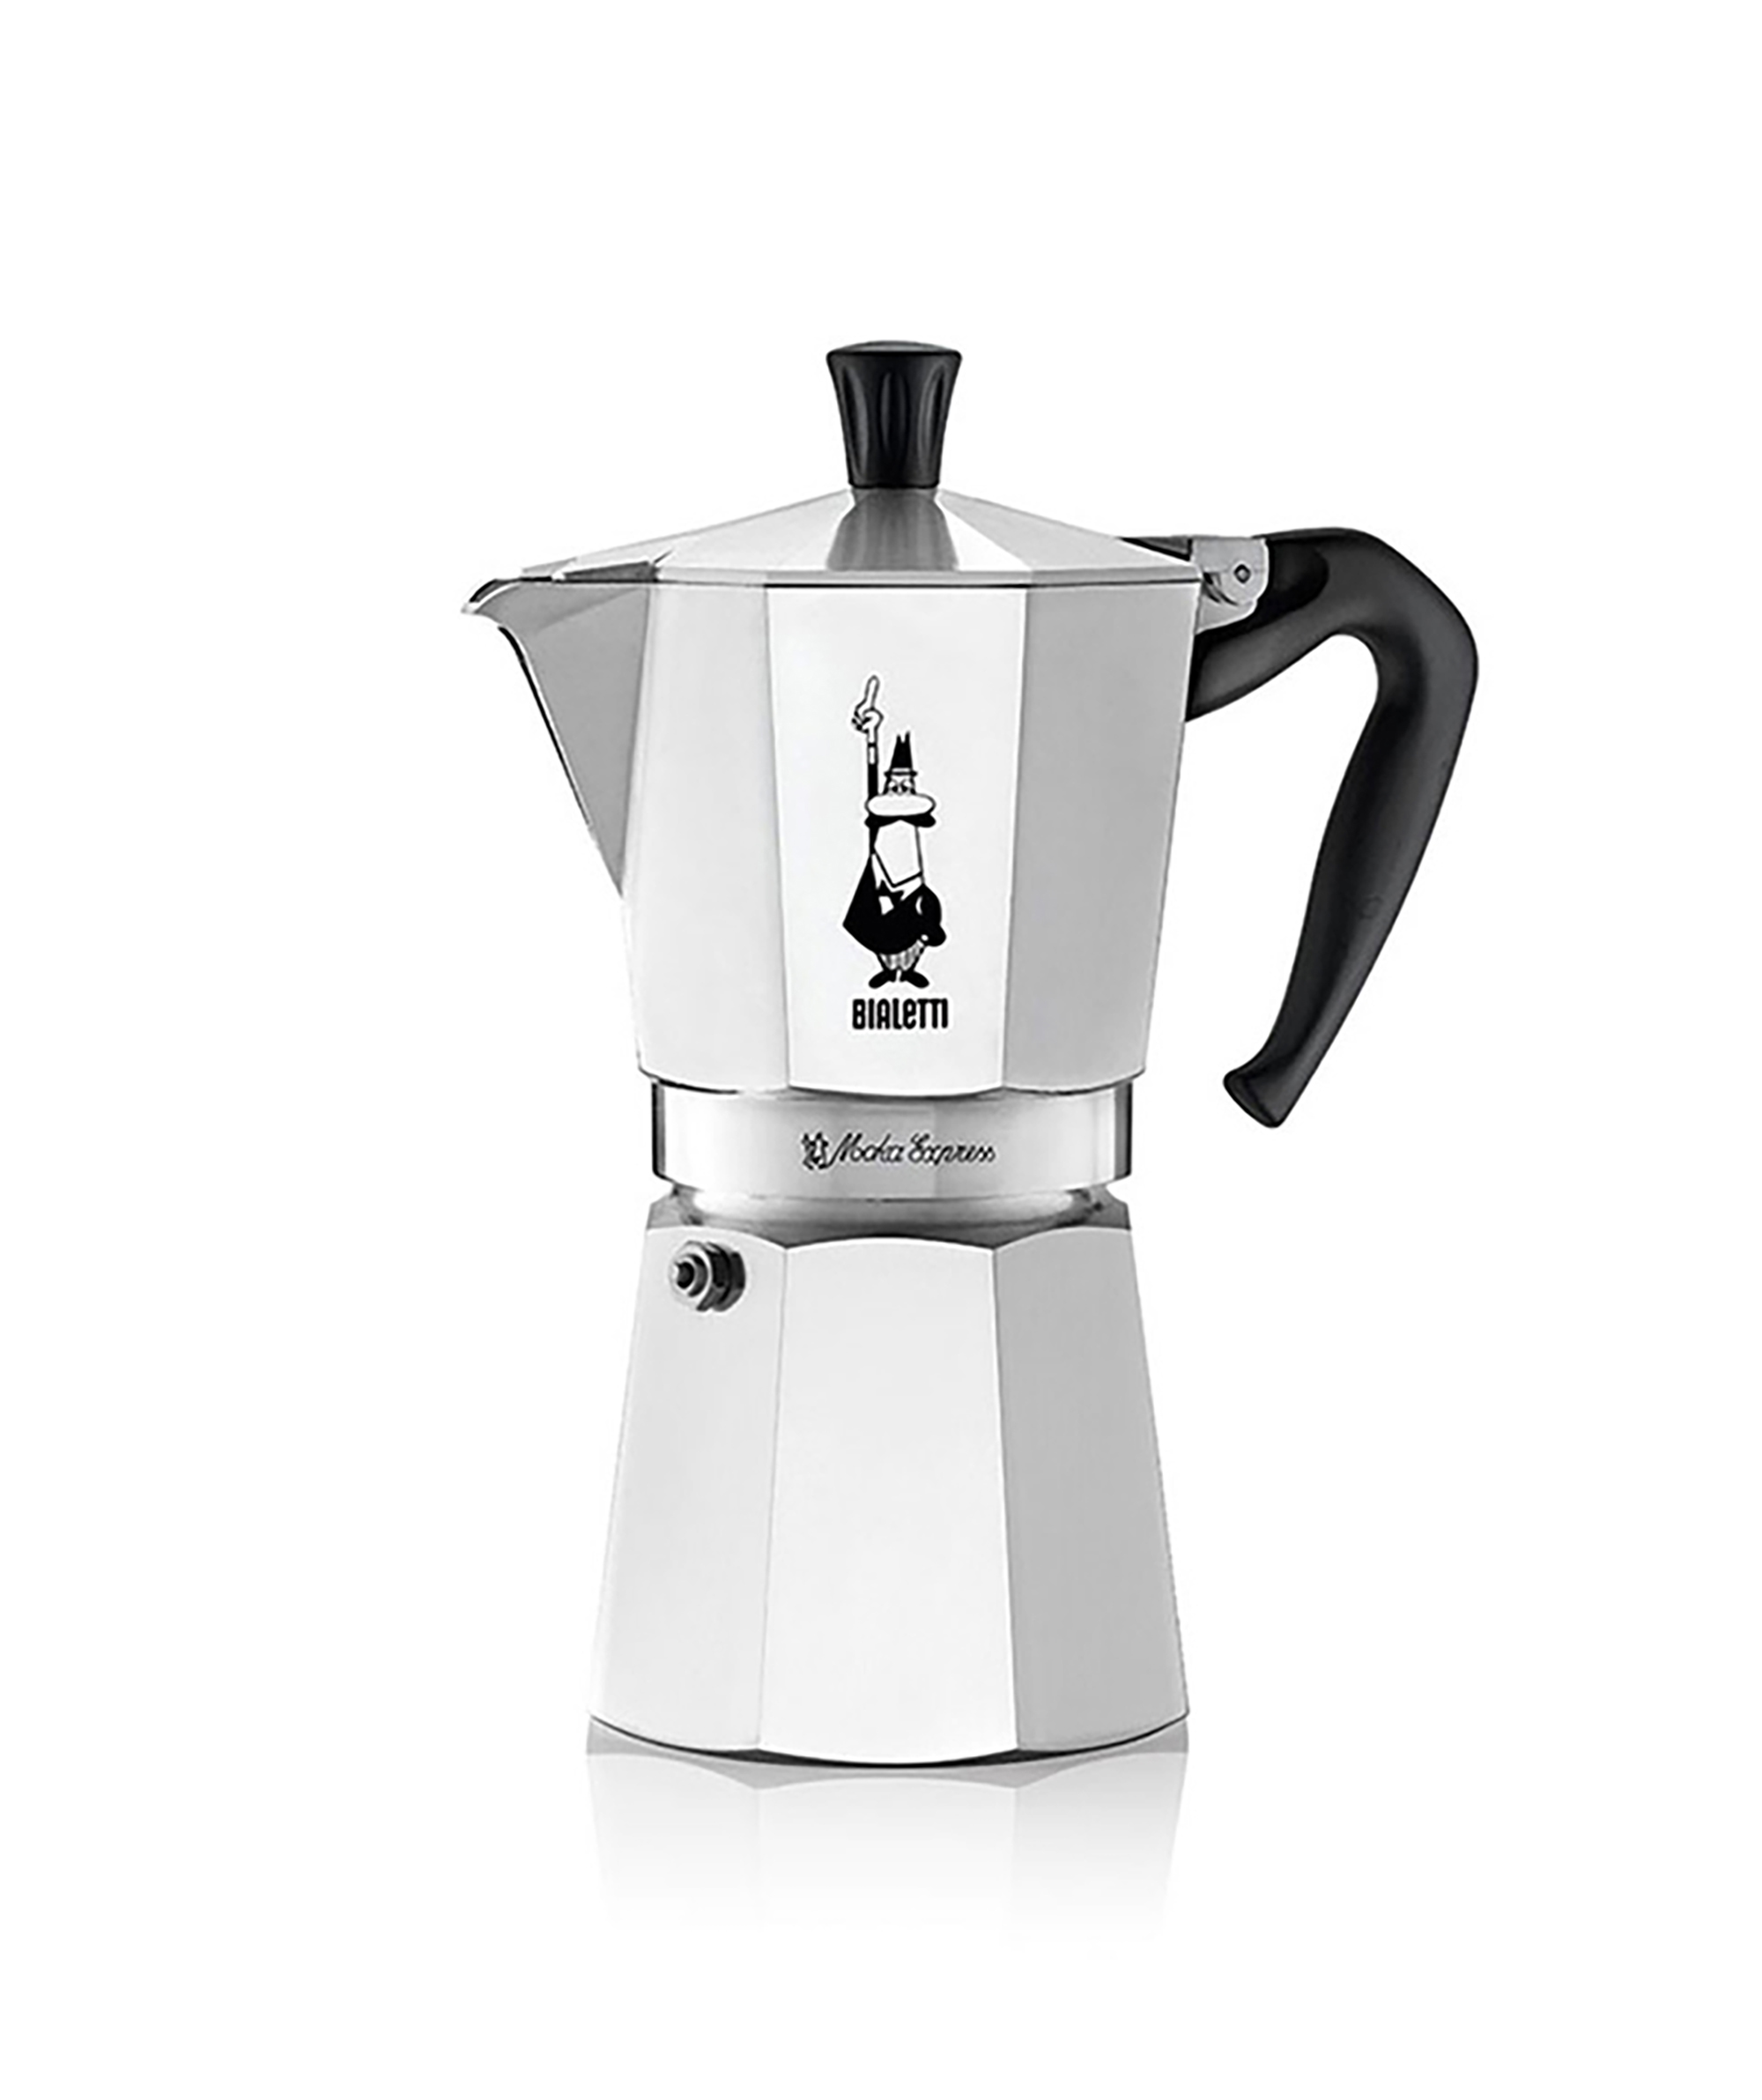 https://www.whittard.com/on/demandware.static/-/Sites-whittard-master-catalog/default/dwae010a32/images/hi-res/307942-BIALETTI_MOKA_EXPRESS_6CUP_STOVETOP-1.jpg